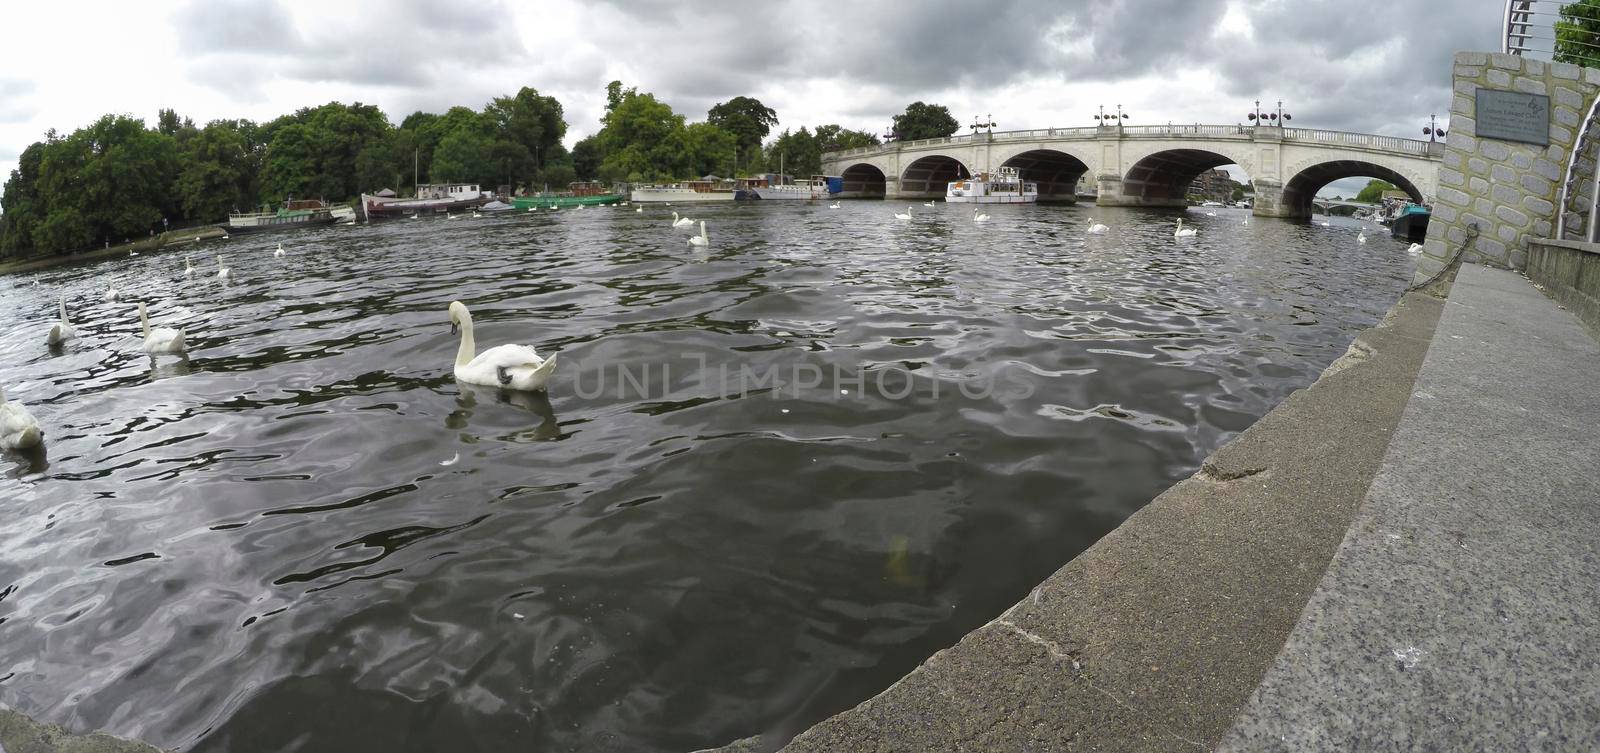 LONDON, ENGLAND - 15 July 2017: Big boat and swans in front of it in Kingston, London, UK by zefart